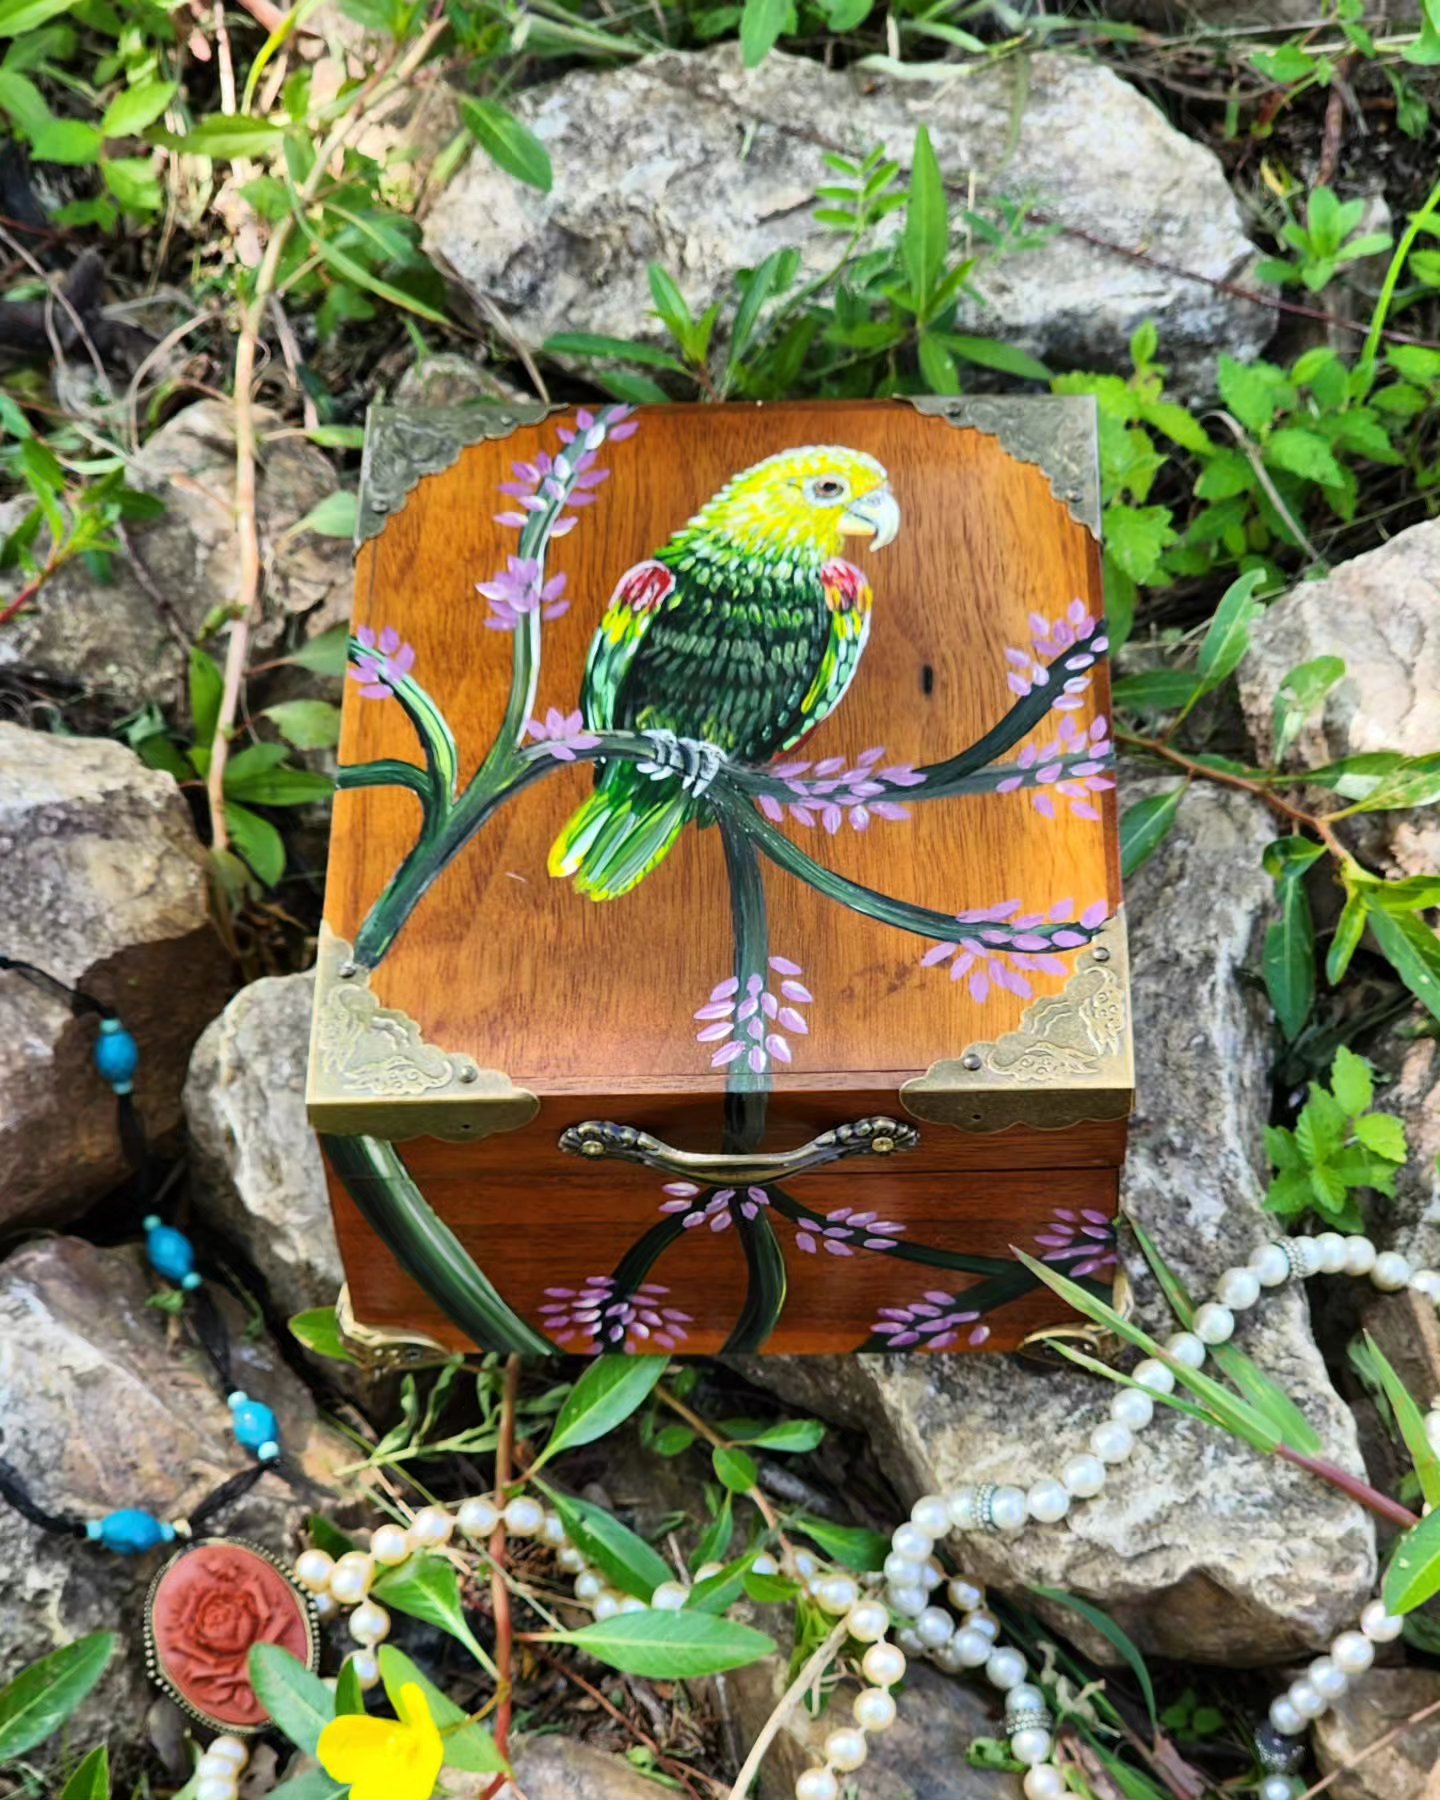 Antique wooden jewelry box with original design of a Yellow Headed Amazon. This box includes hard plastic feet, bronze handle, bronze decorative corners, and red pad insert ring.